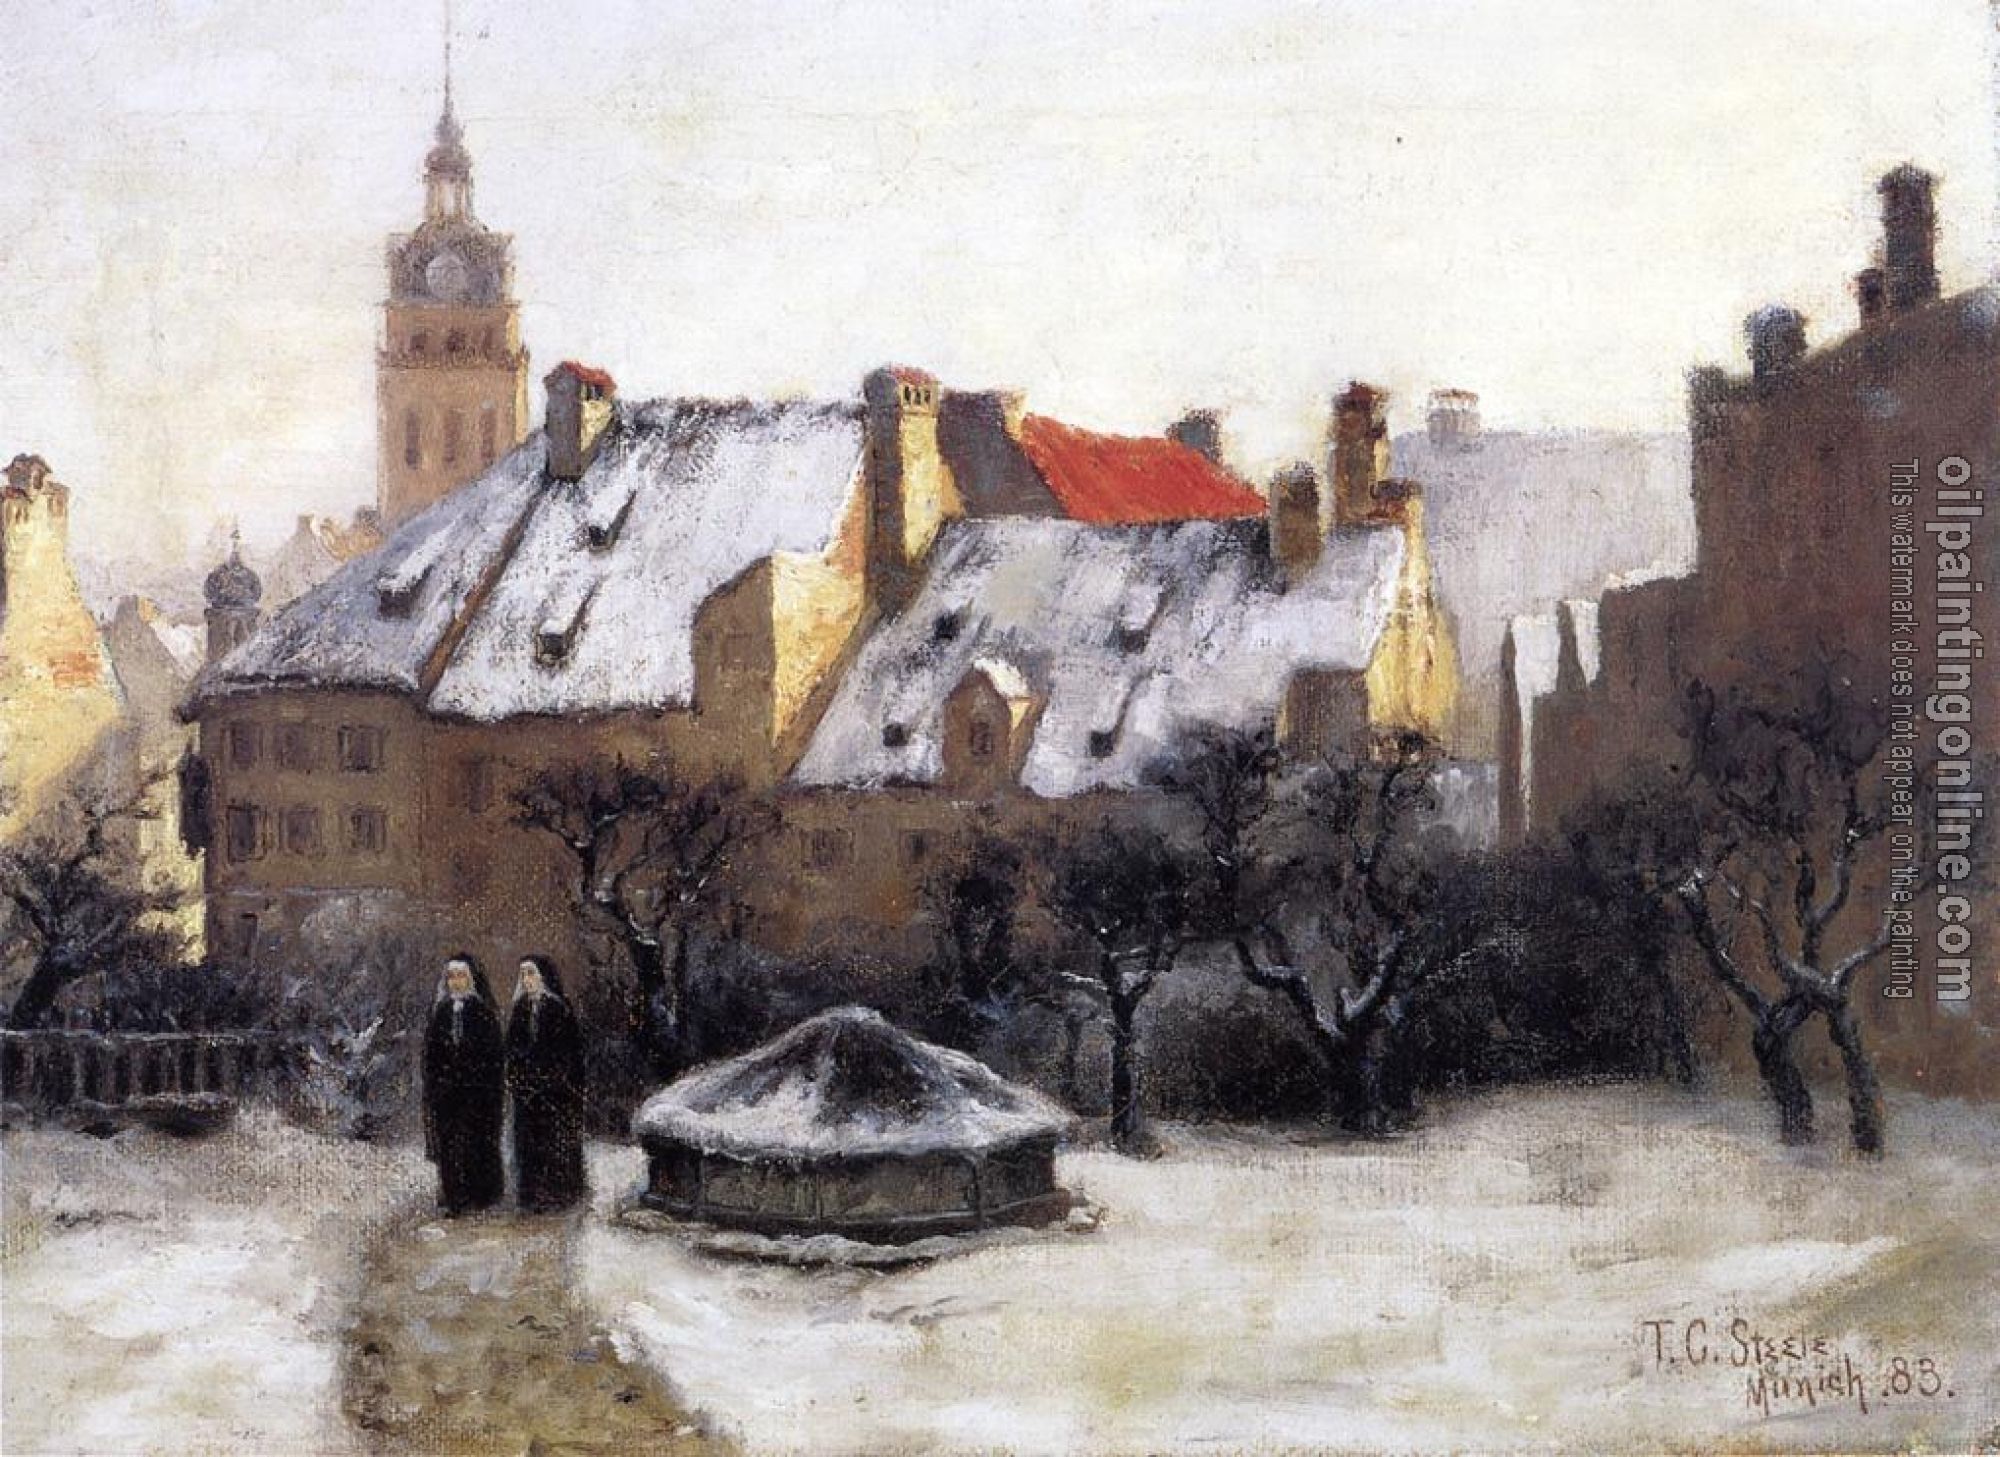 Steele, Theodore Clement - Winter Afternoon - Old Munich